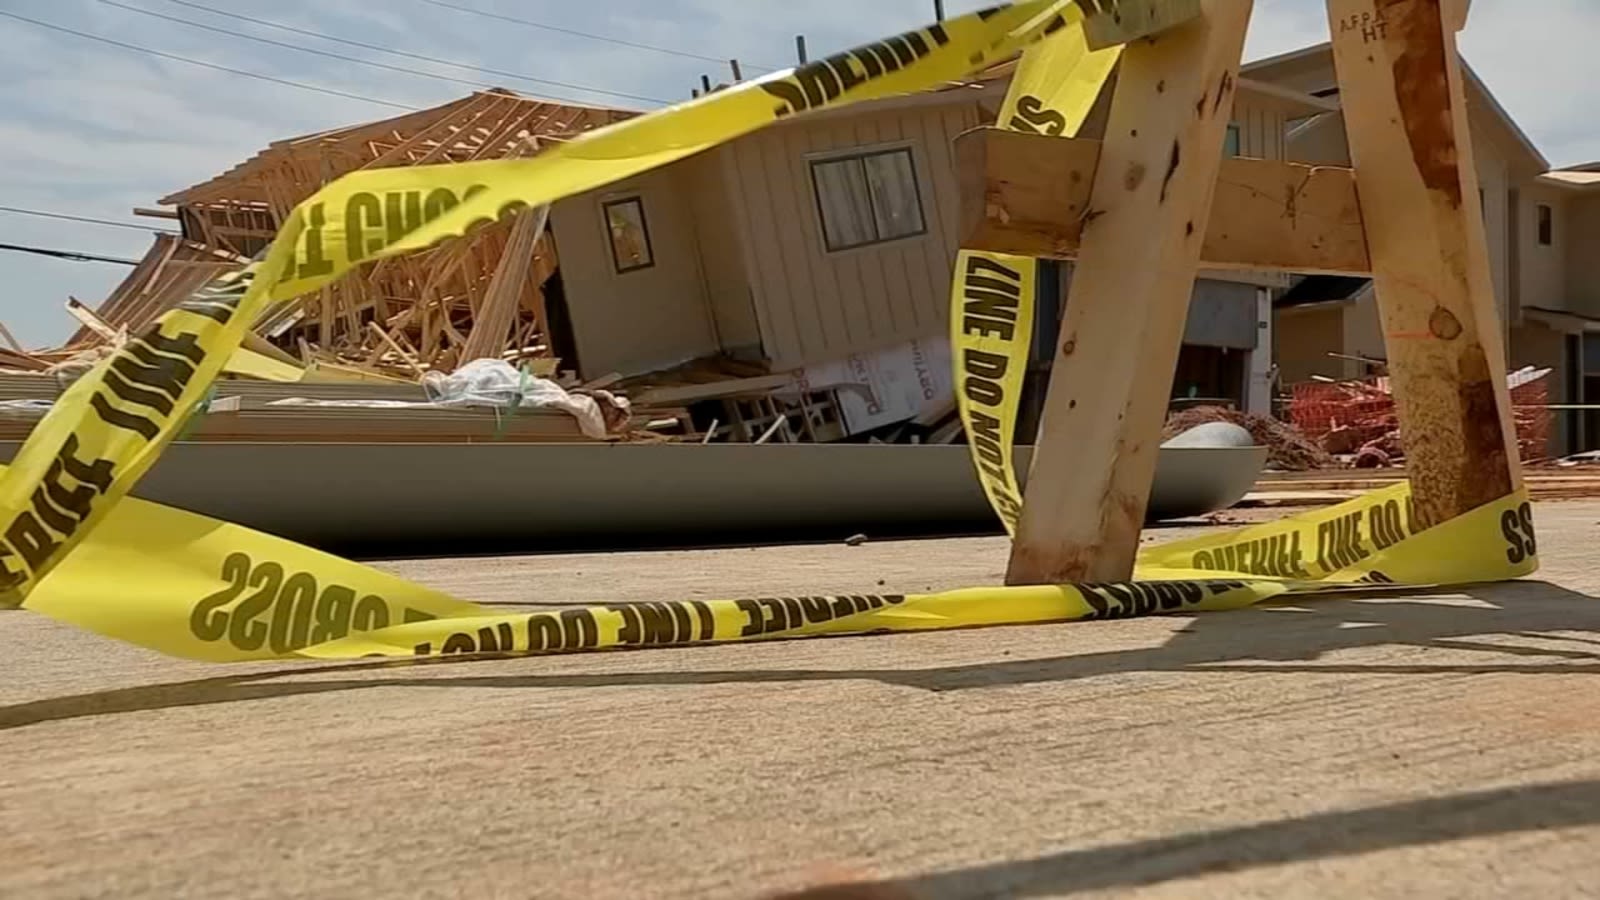 US Department of Labor investigates death of teenage worker after Magnolia home collapse